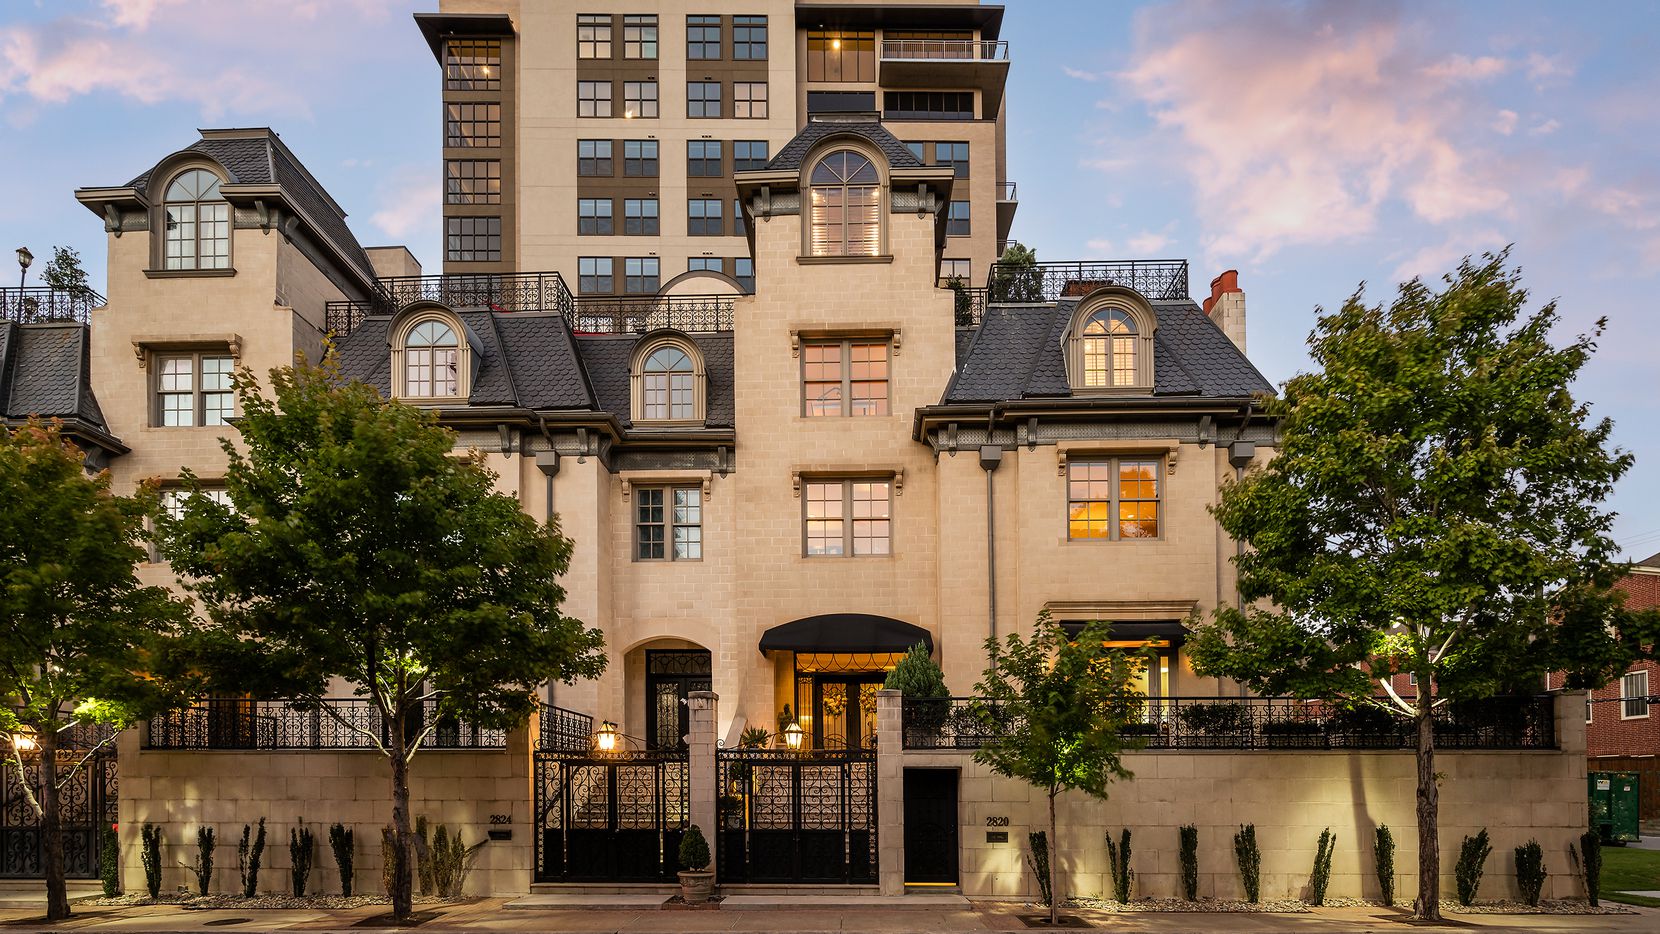 This Uptown Dallas townhouse is four stories tall with an elevator and a home theater